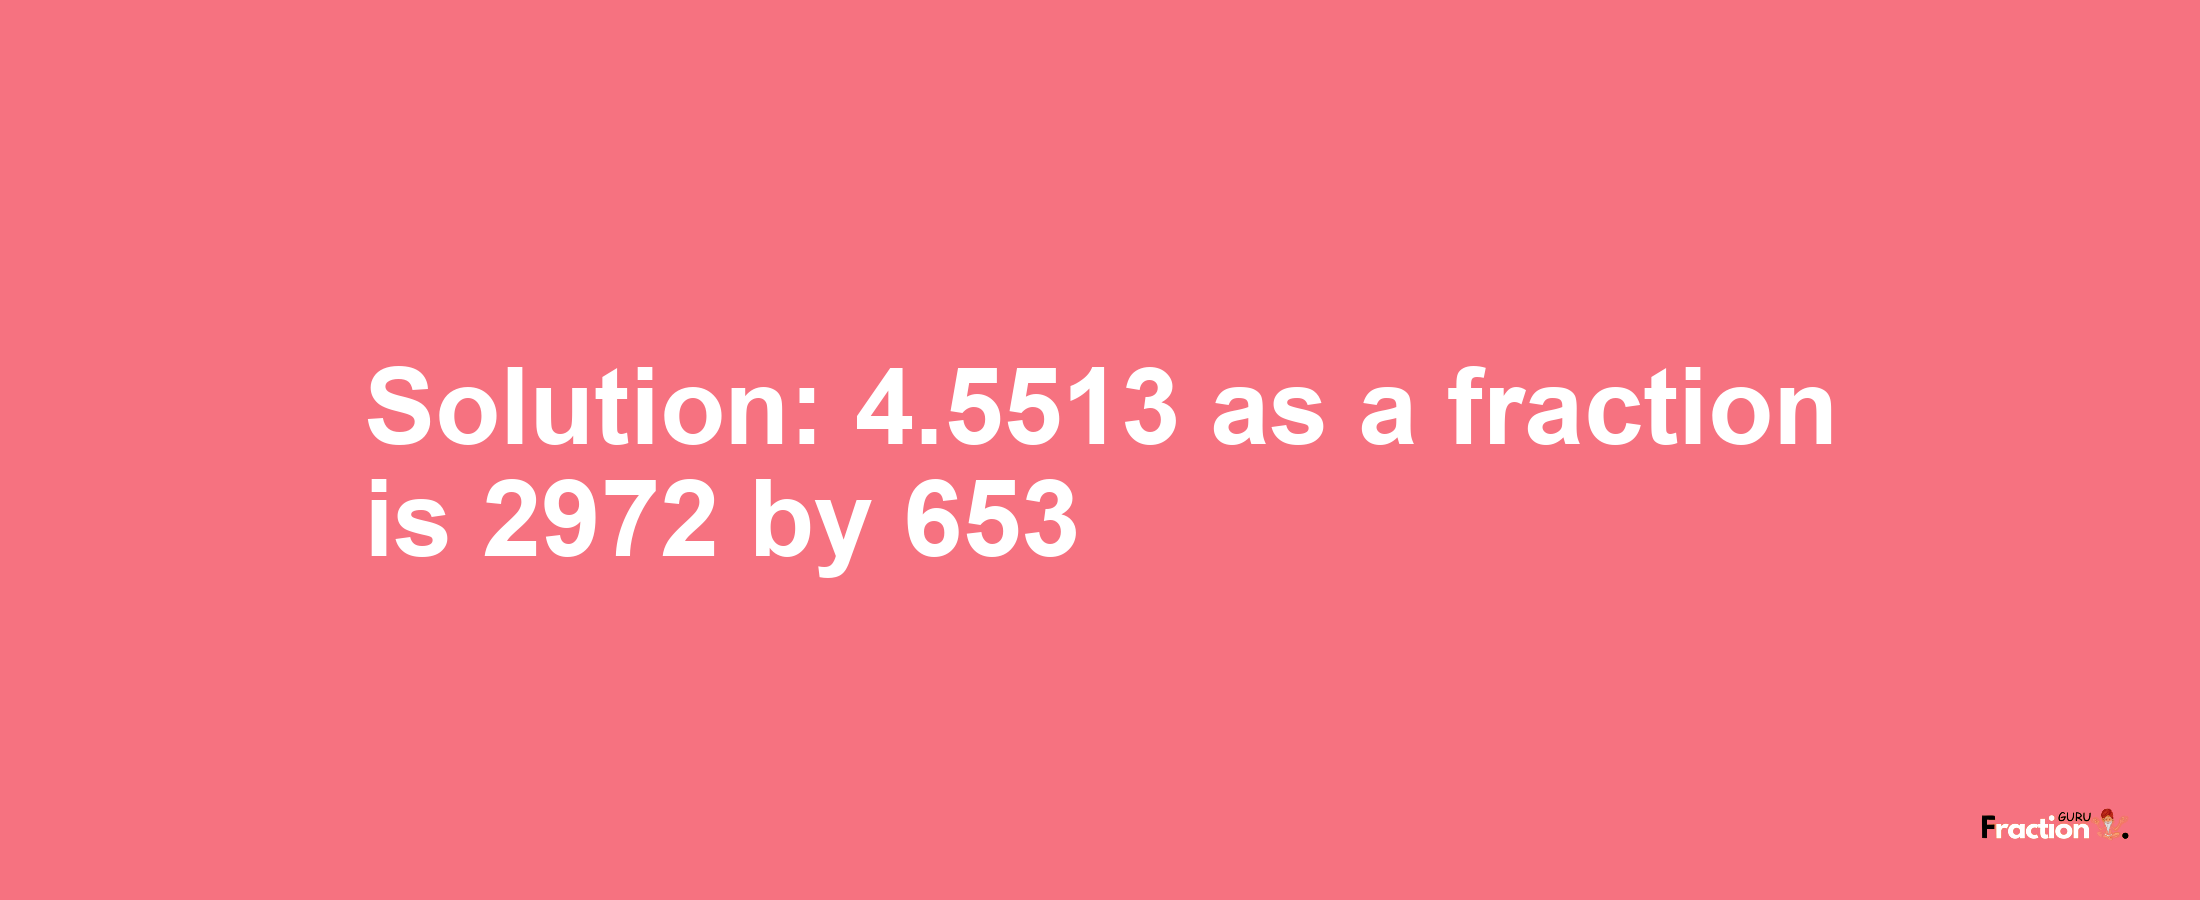 Solution:4.5513 as a fraction is 2972/653